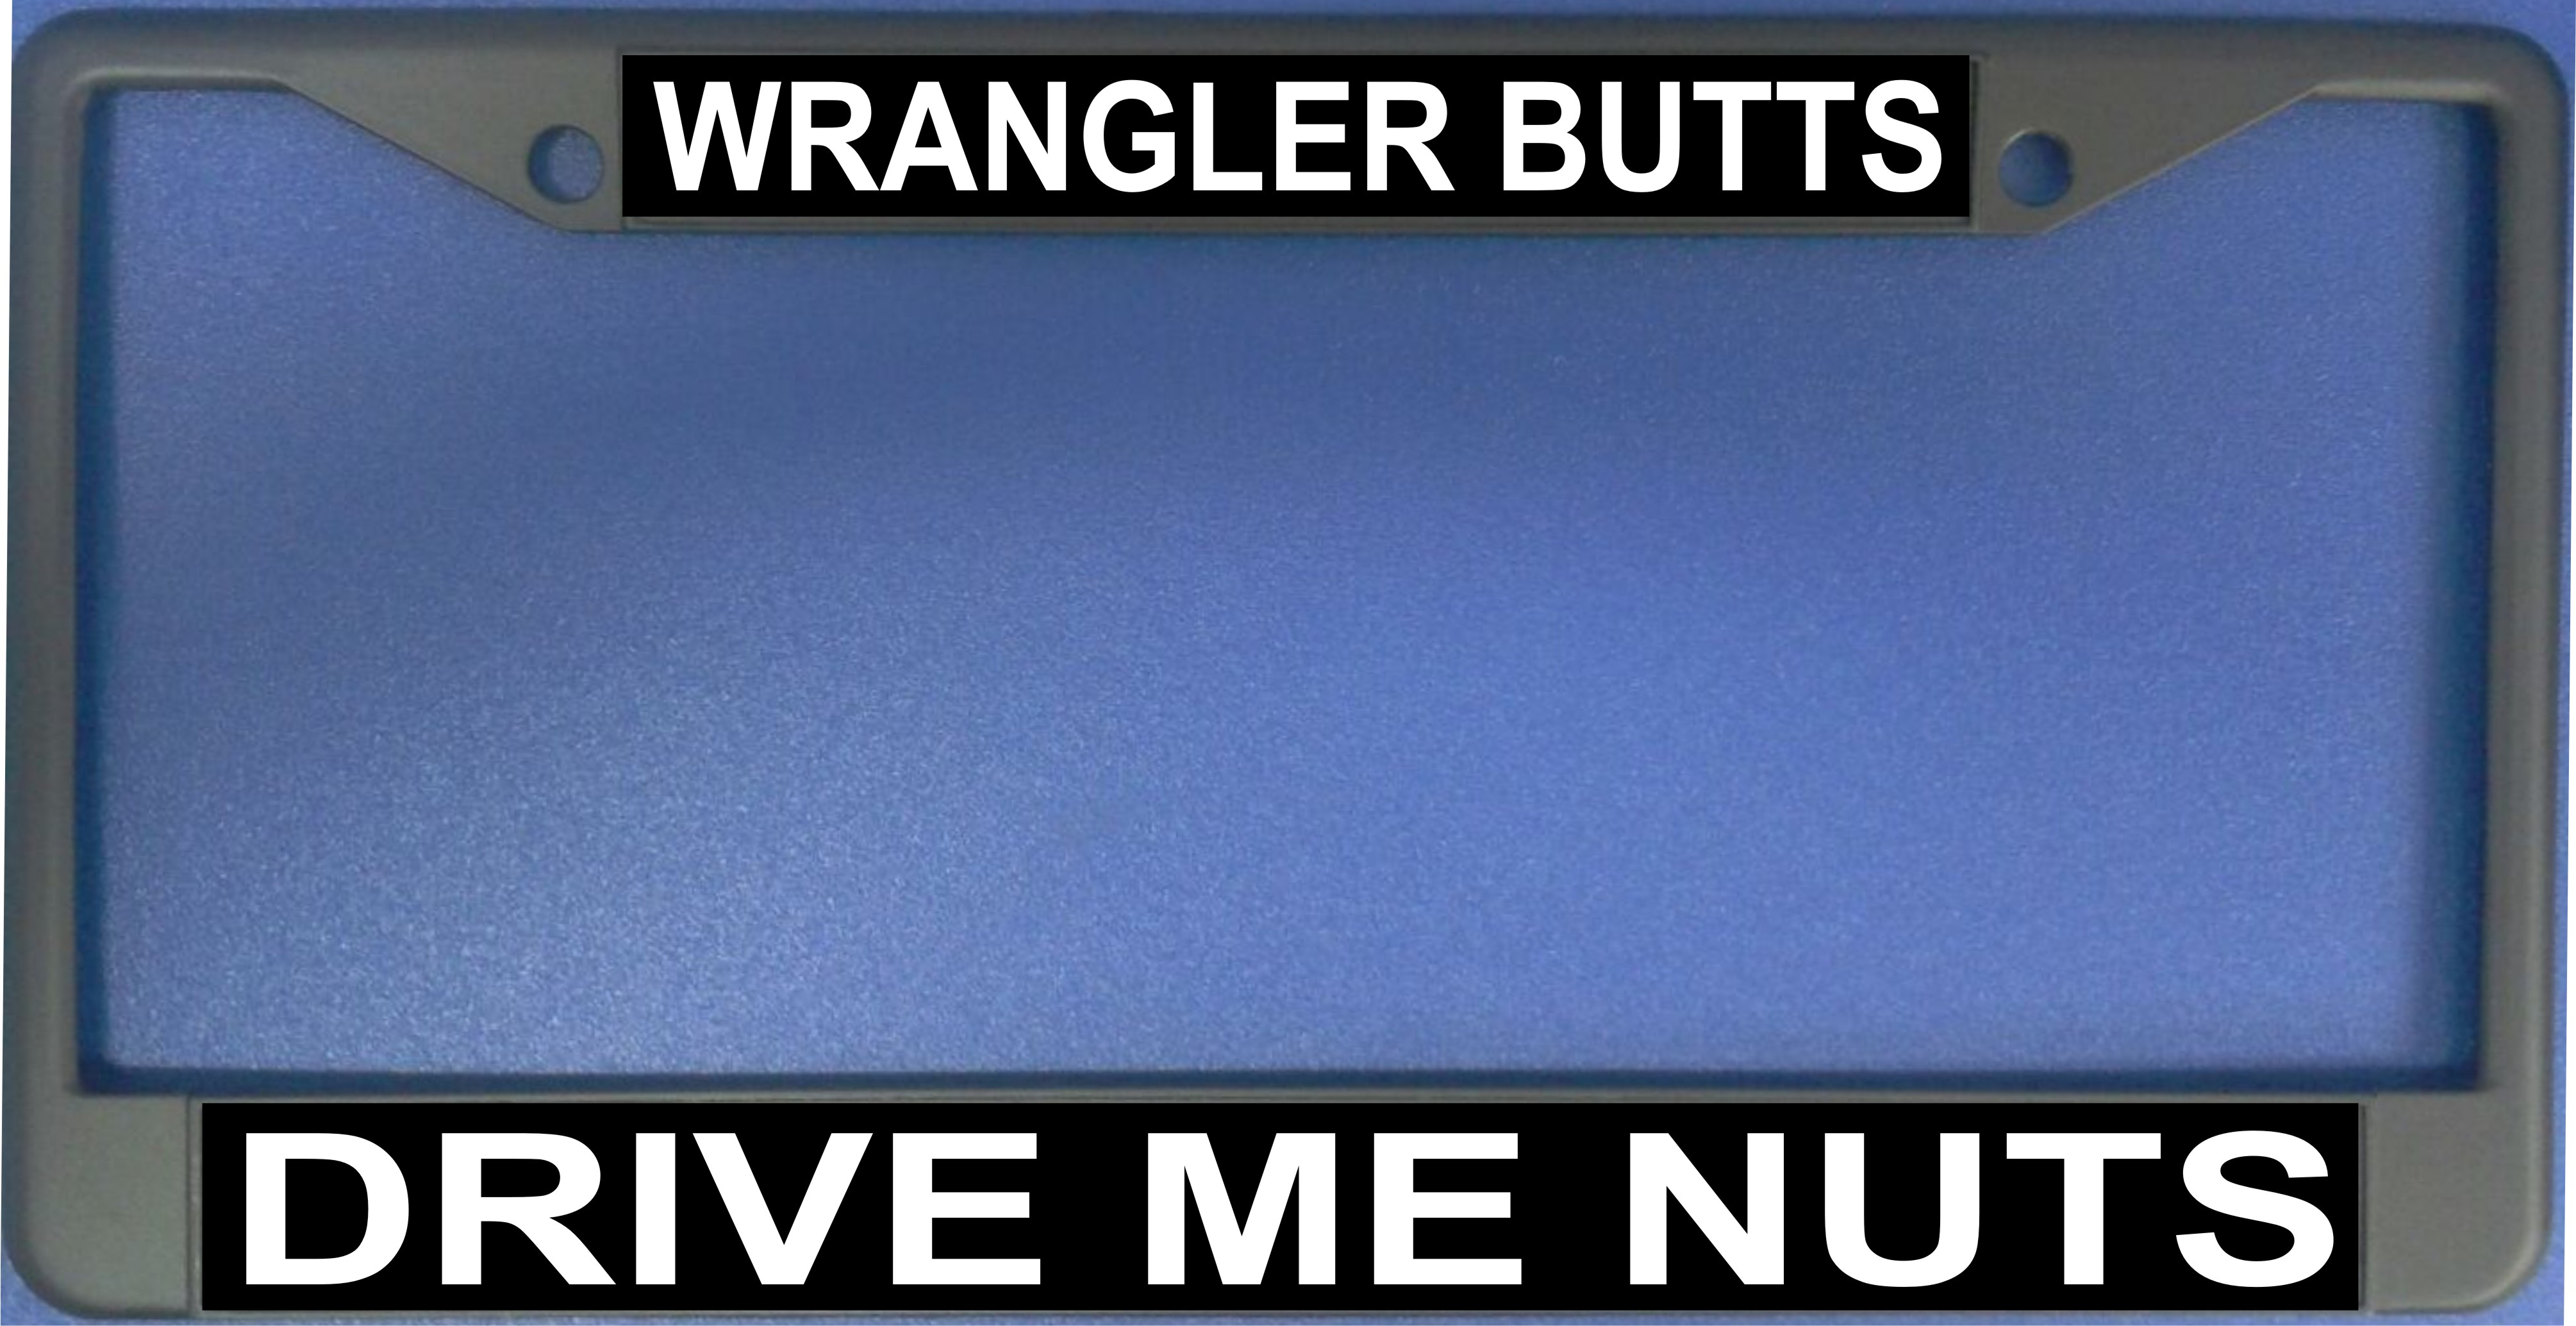 Wrangler Butts Drive Me Nuts License Plate Frame Free SCREW Caps with this Frame